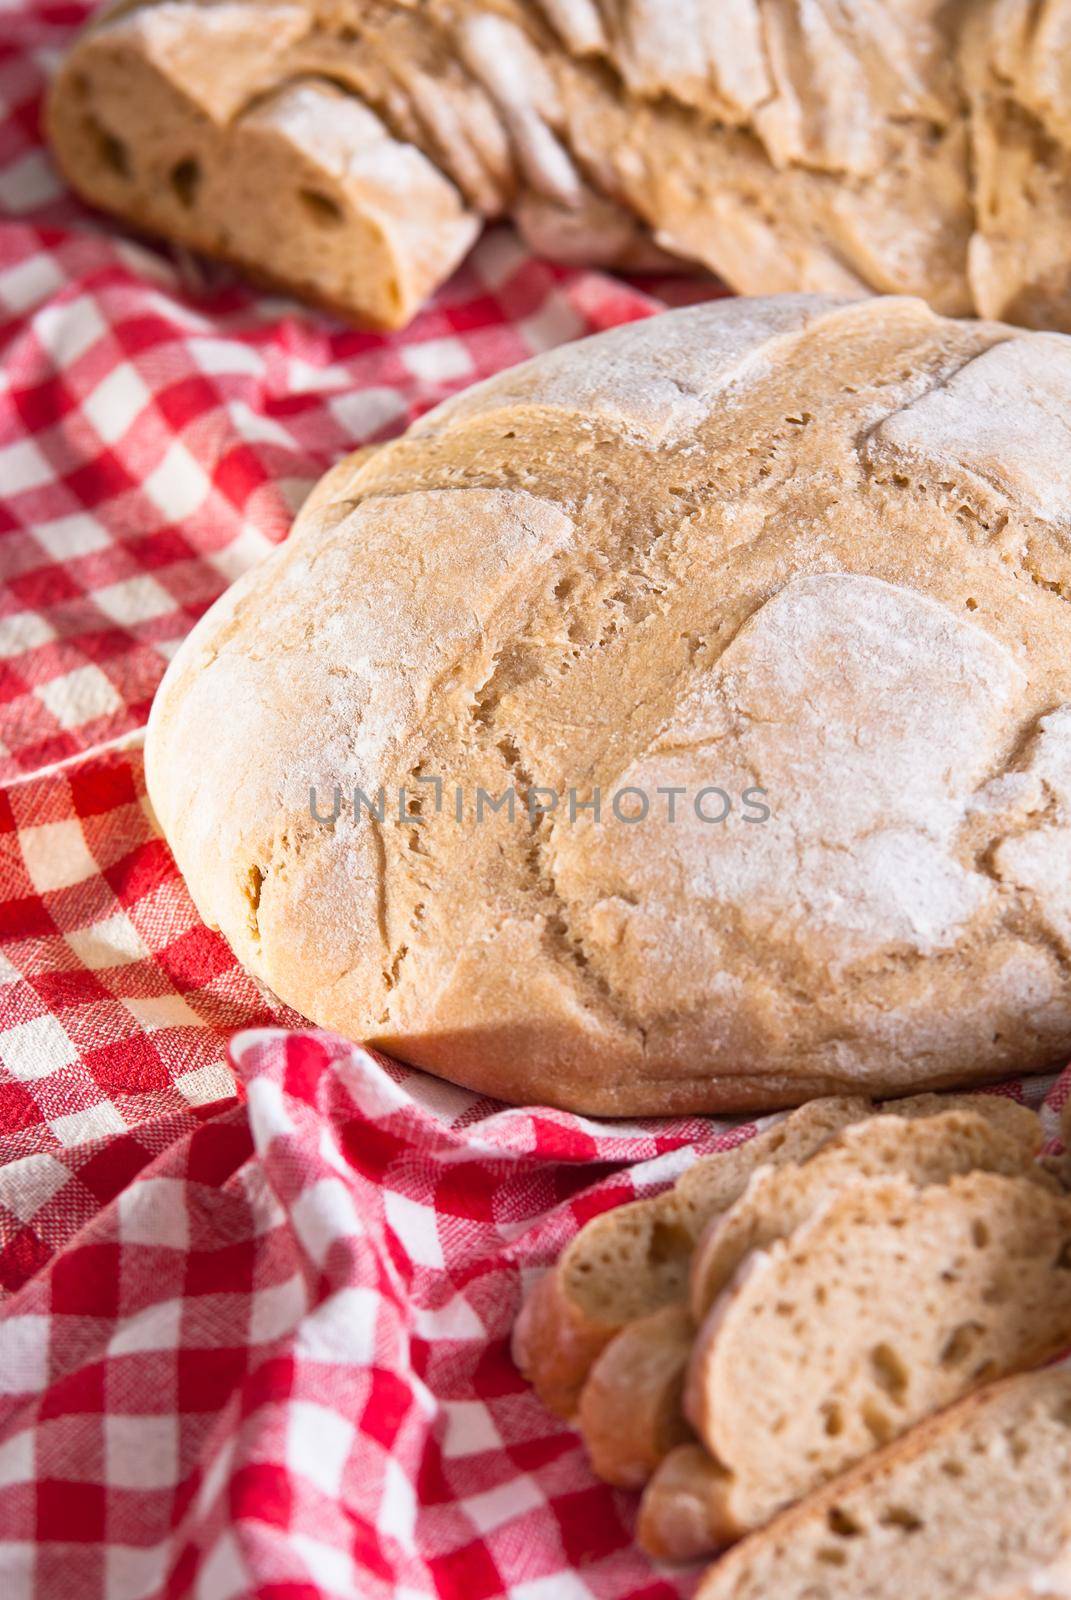 Homemade bread without yeast by maramorosz